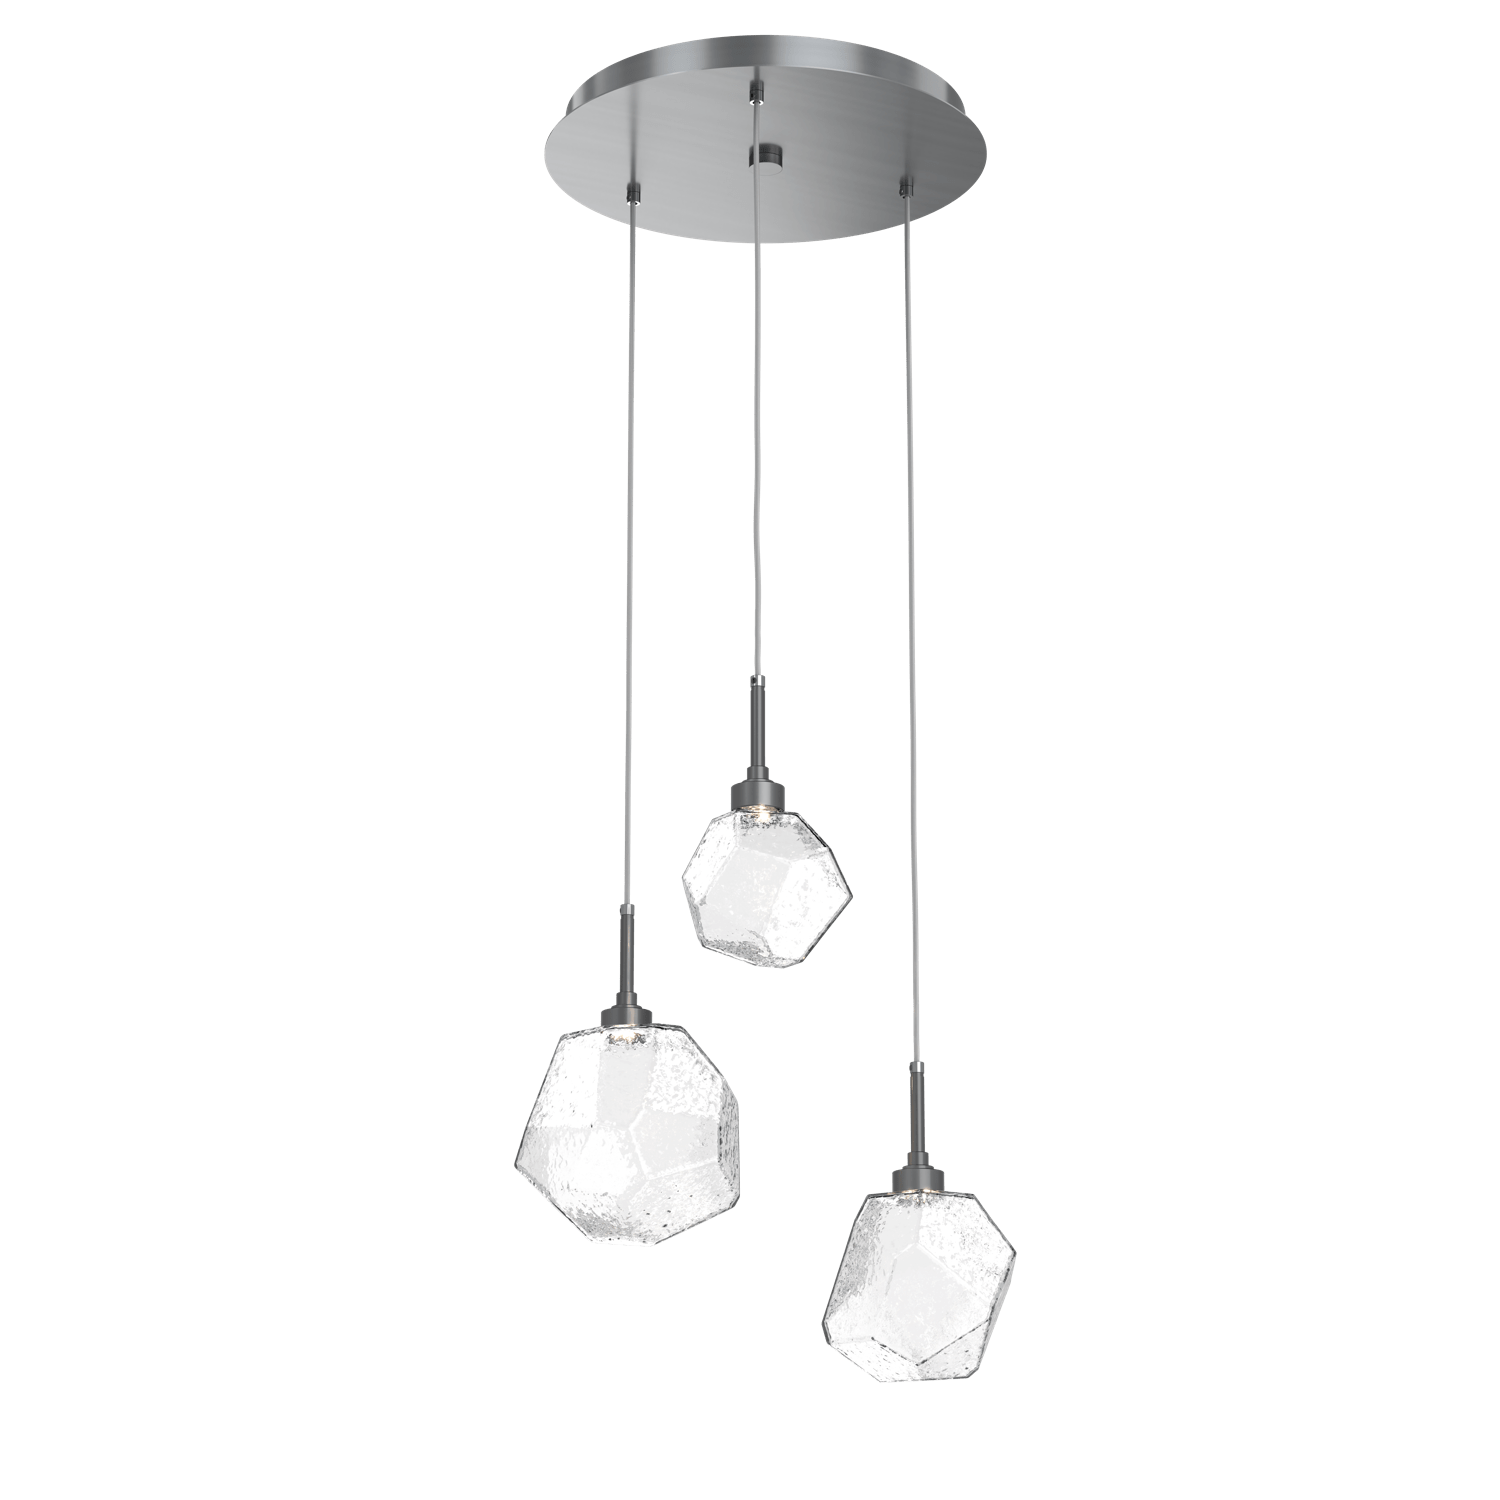 CHB0039-03-GM-C-Hammerton-Studio-Gem-3-light-round-pendant-chandelier-with-gunmetal-finish-and-clear-blown-glass-shades-and-LED-lamping